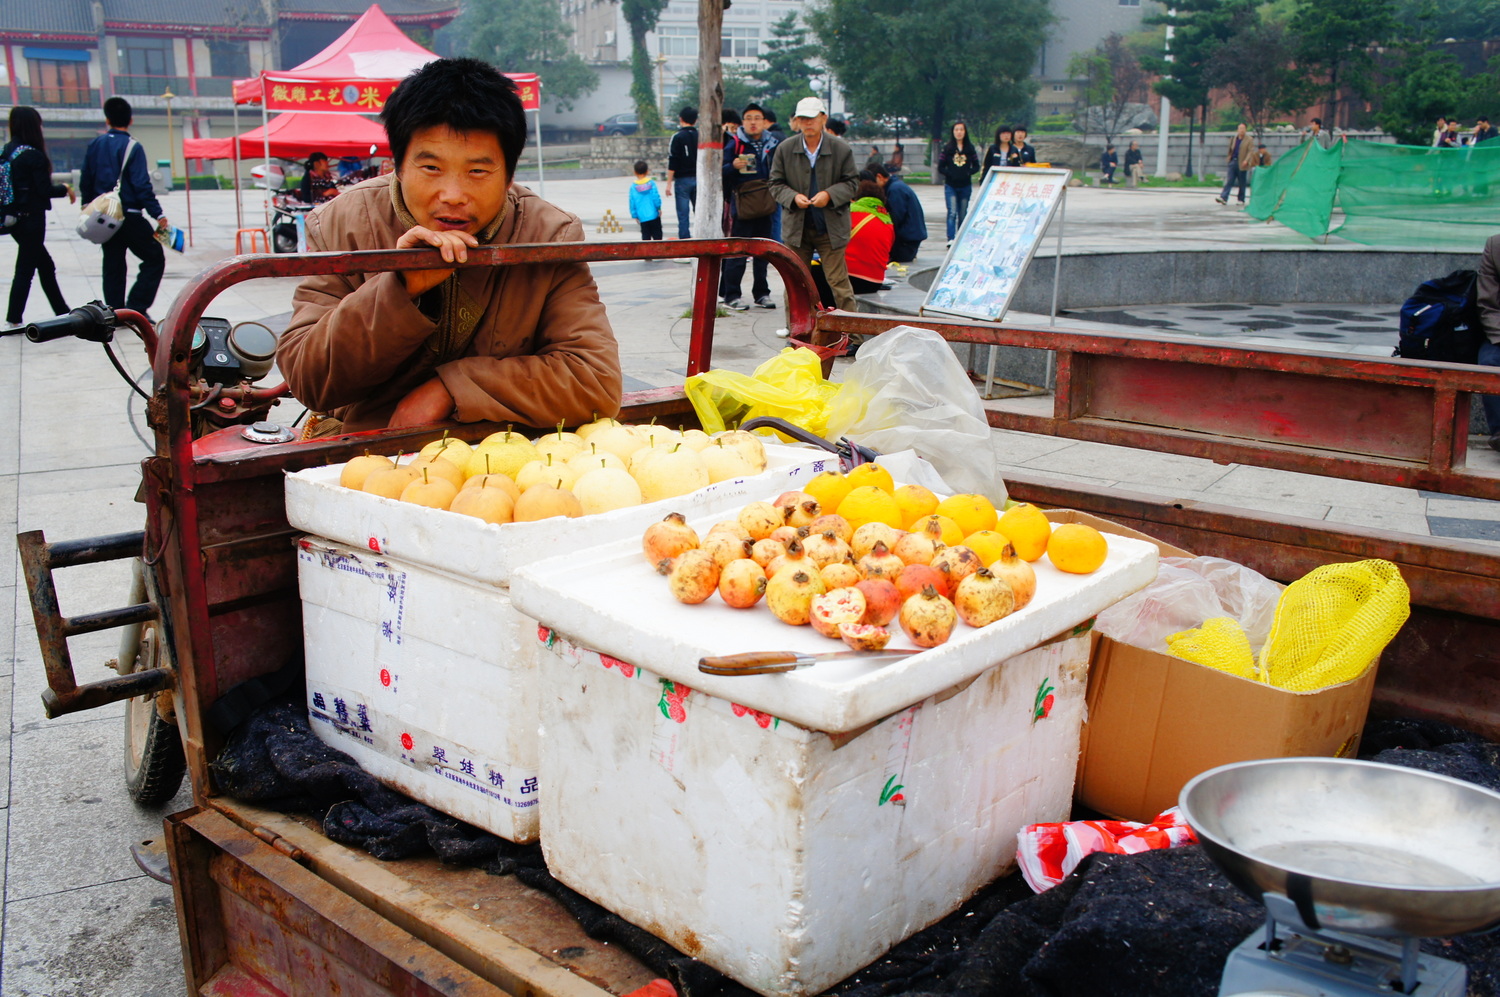 You even have to haggle for fruits and veggies in the street